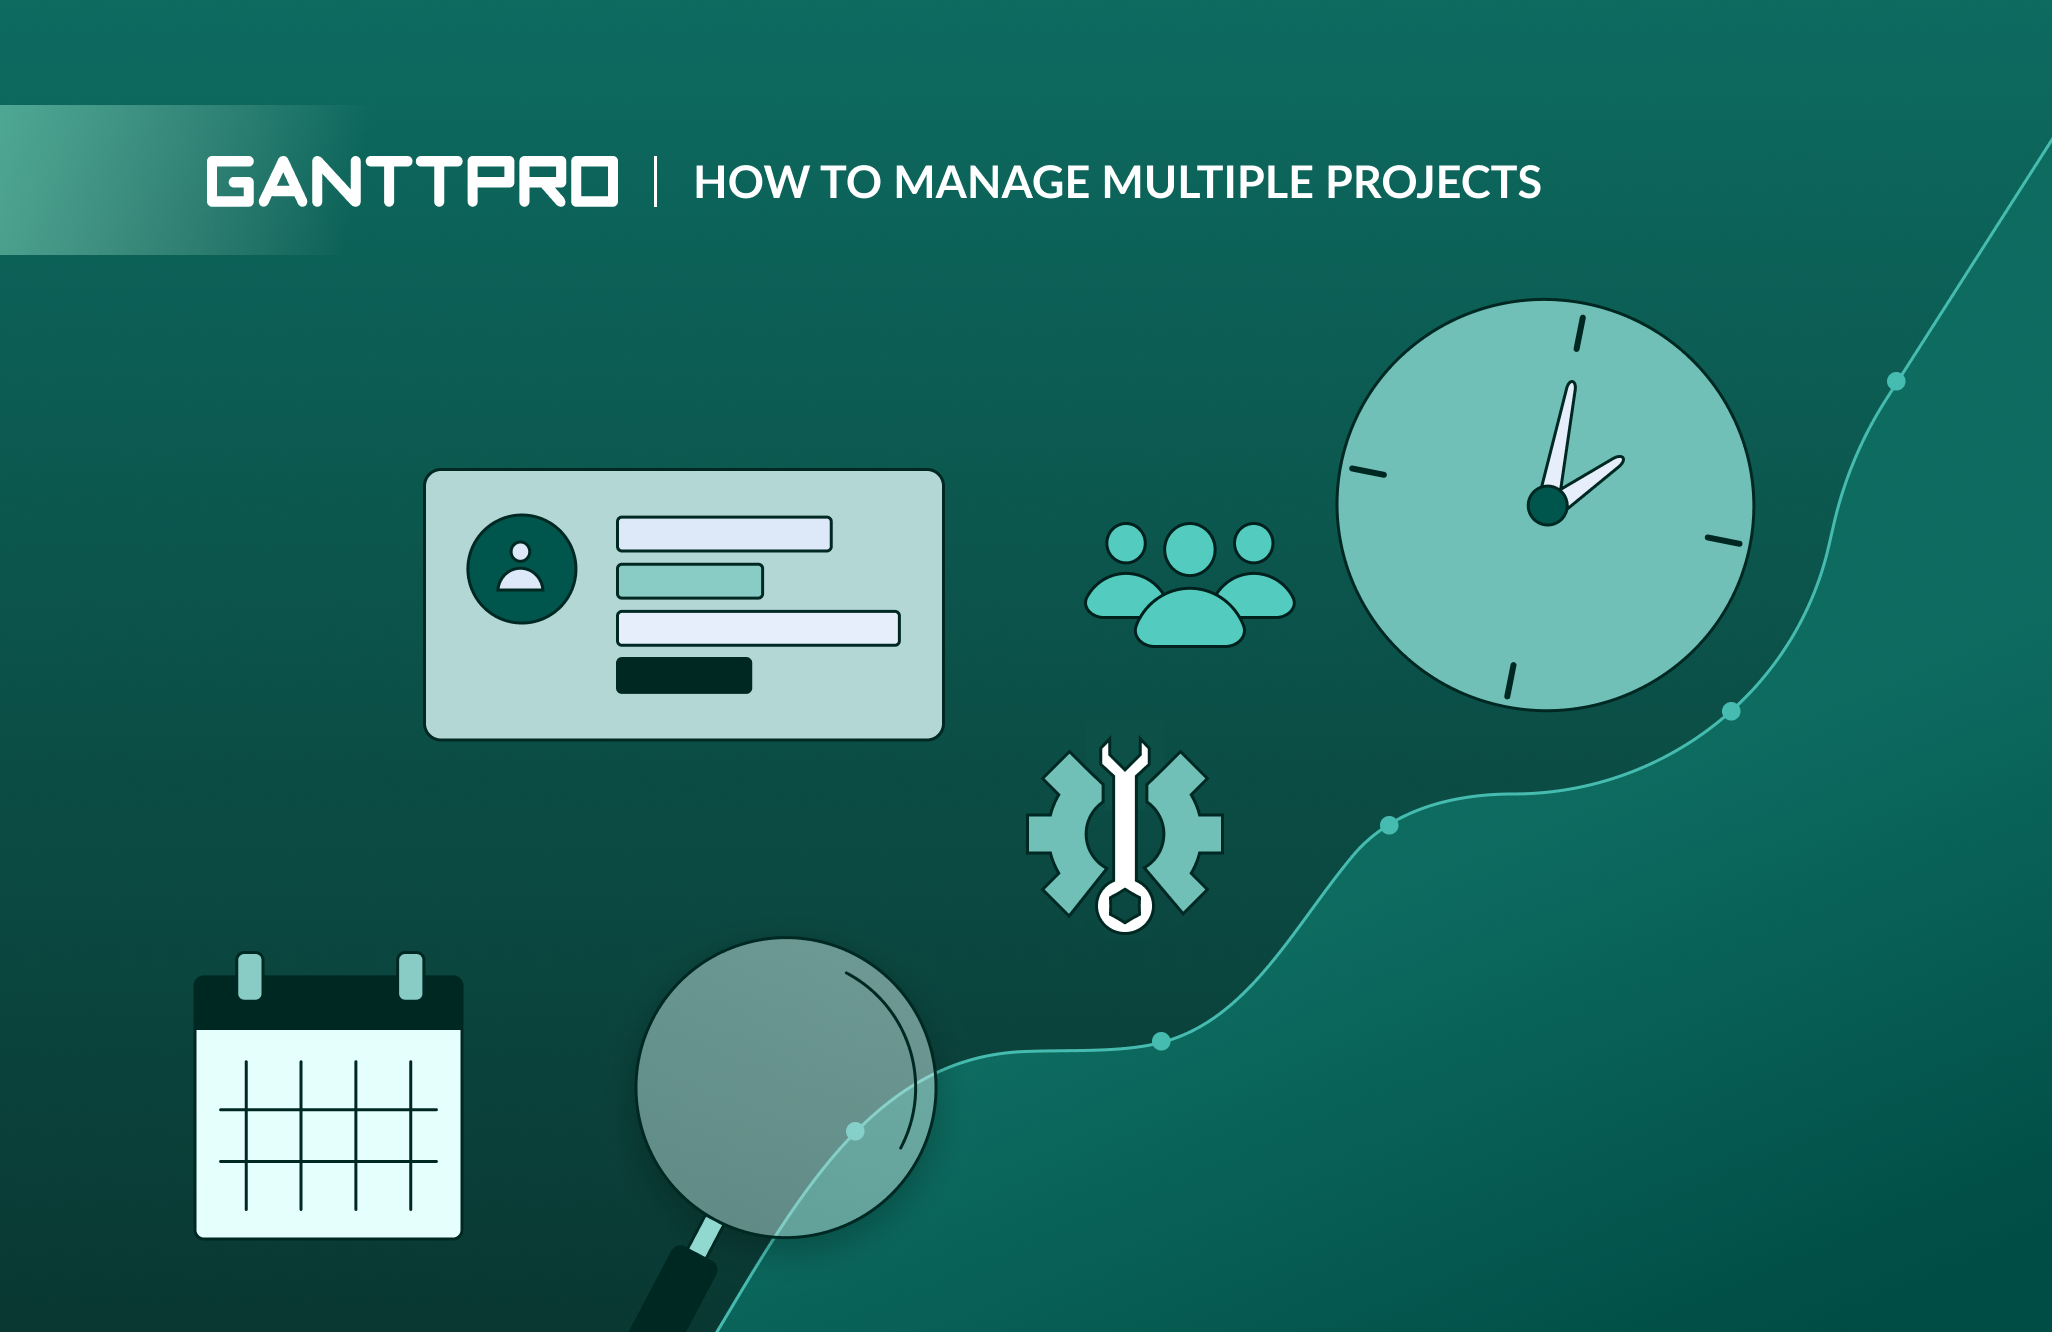 Managing miltiple projects